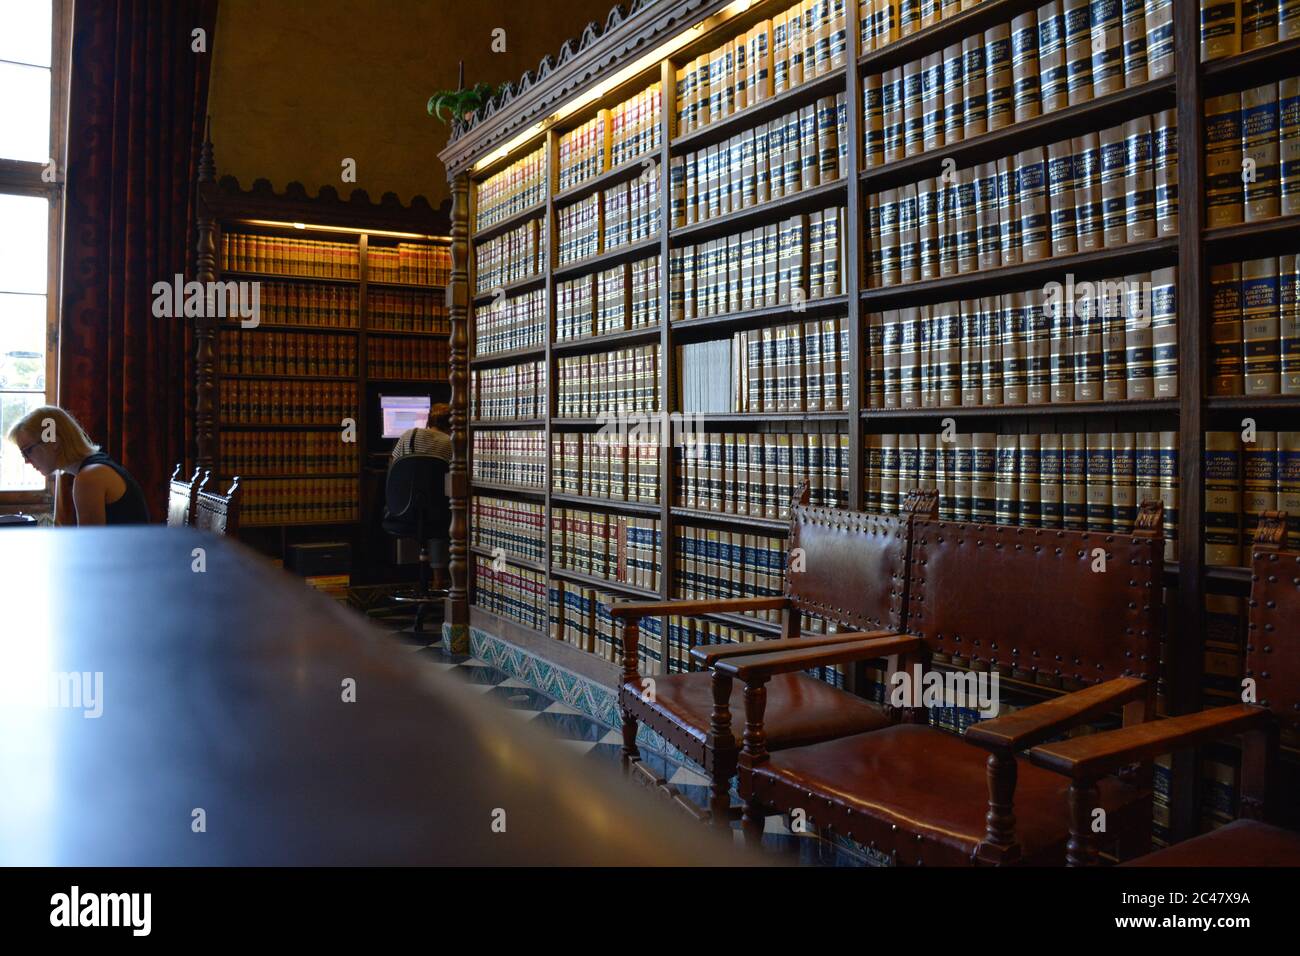 Large reflecting table in the Santa Barbara County Law Library interior with bookcases full of California appellate Report Books and leather chairs Stock Photo